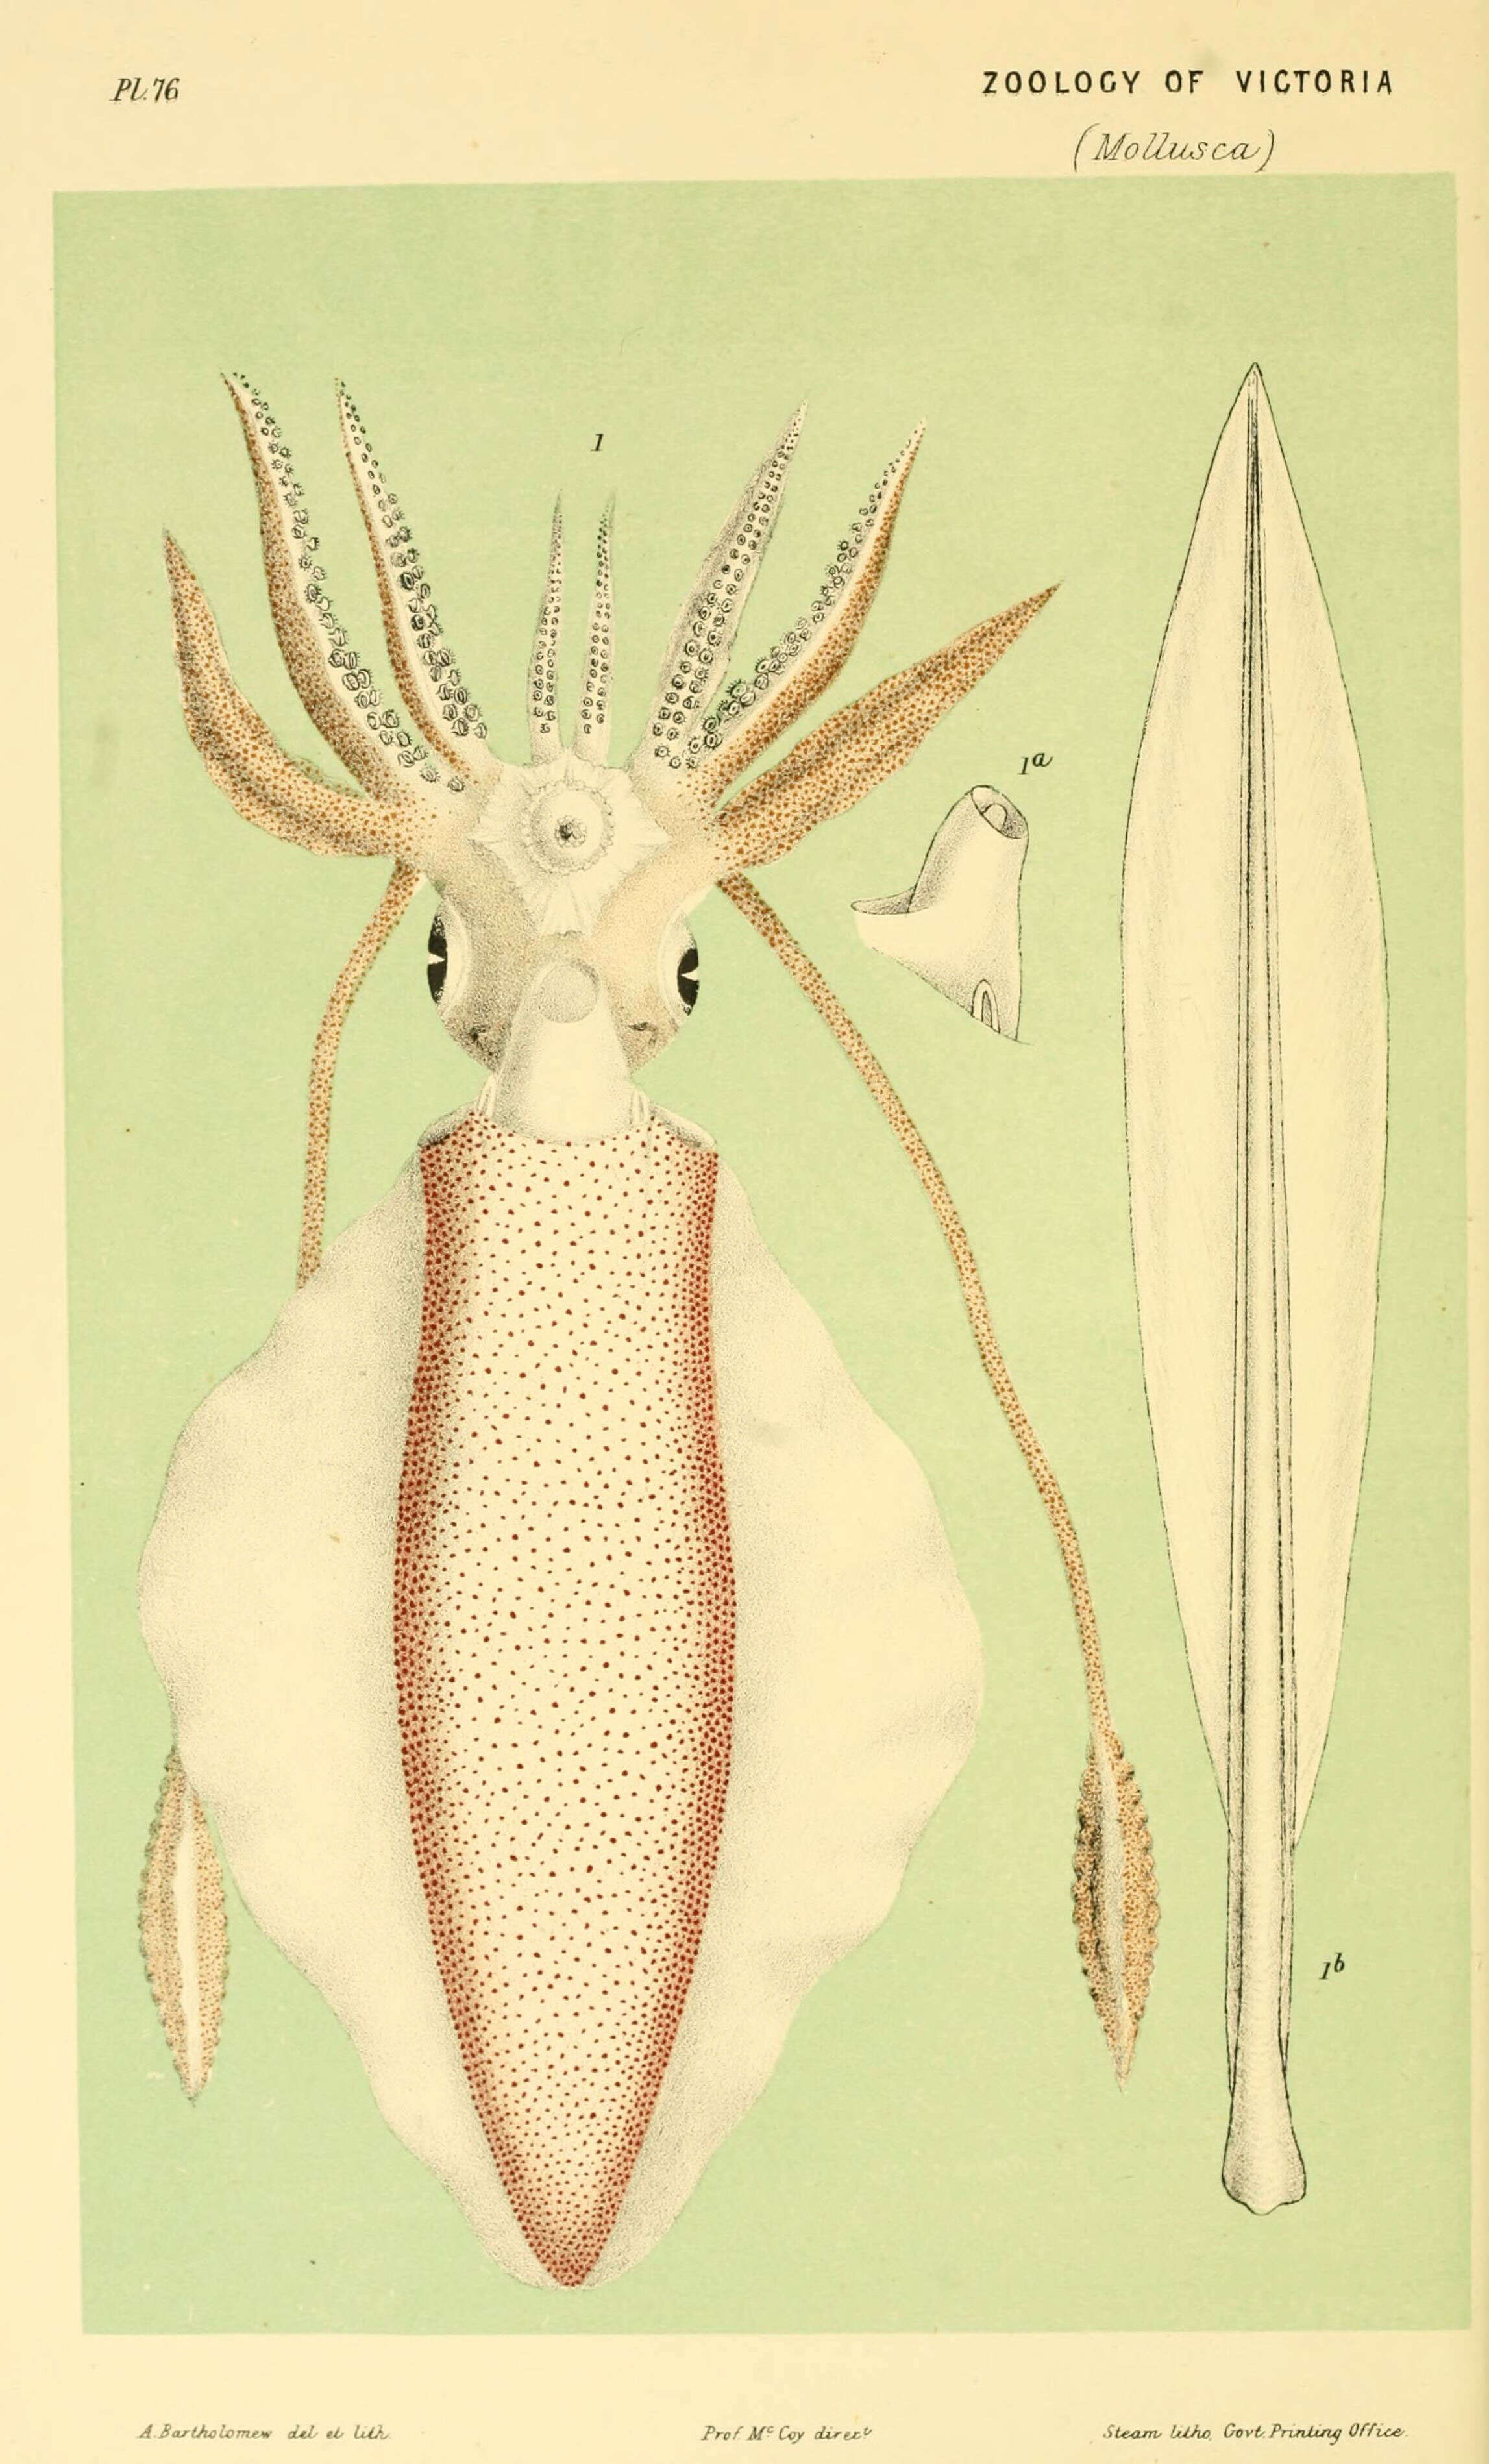 Image of Southern reef squid